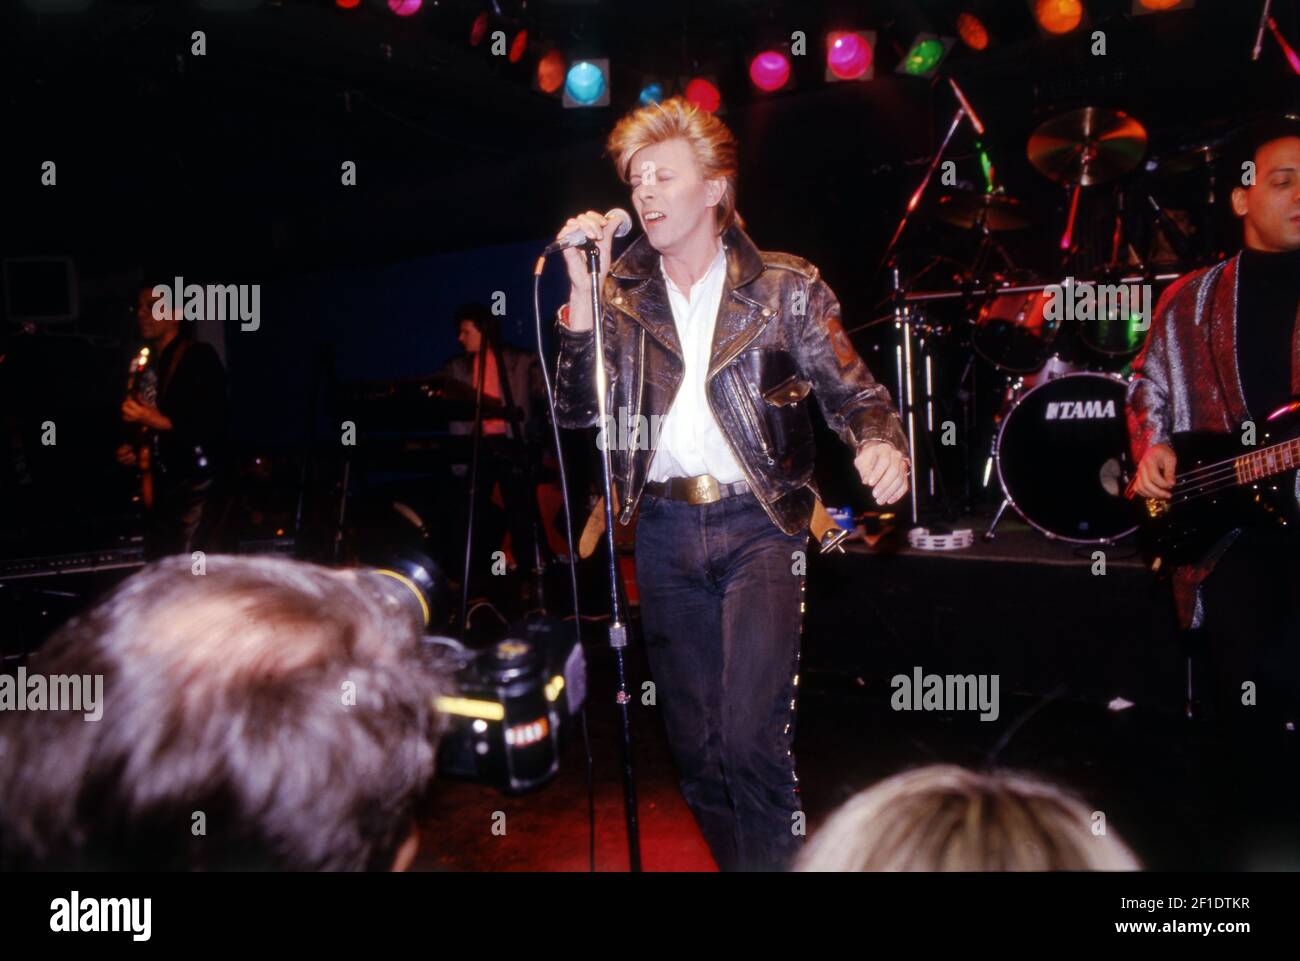 March 18, 1987; New York, NY, USA; Rock singer David Bowie performs at a press conference at The Cat Club in Greenwich Village, New York City, on March 18, 1987. The English rock star was announcing a six-month, 100-city tour, titled 'Serious Moonlight,' scheduled to being in Rotterdam. Mandatory Credit: Robert S. Townsend/NorthJersey.com via USA TODAY NETWORK/Sipa USA Stock Photo